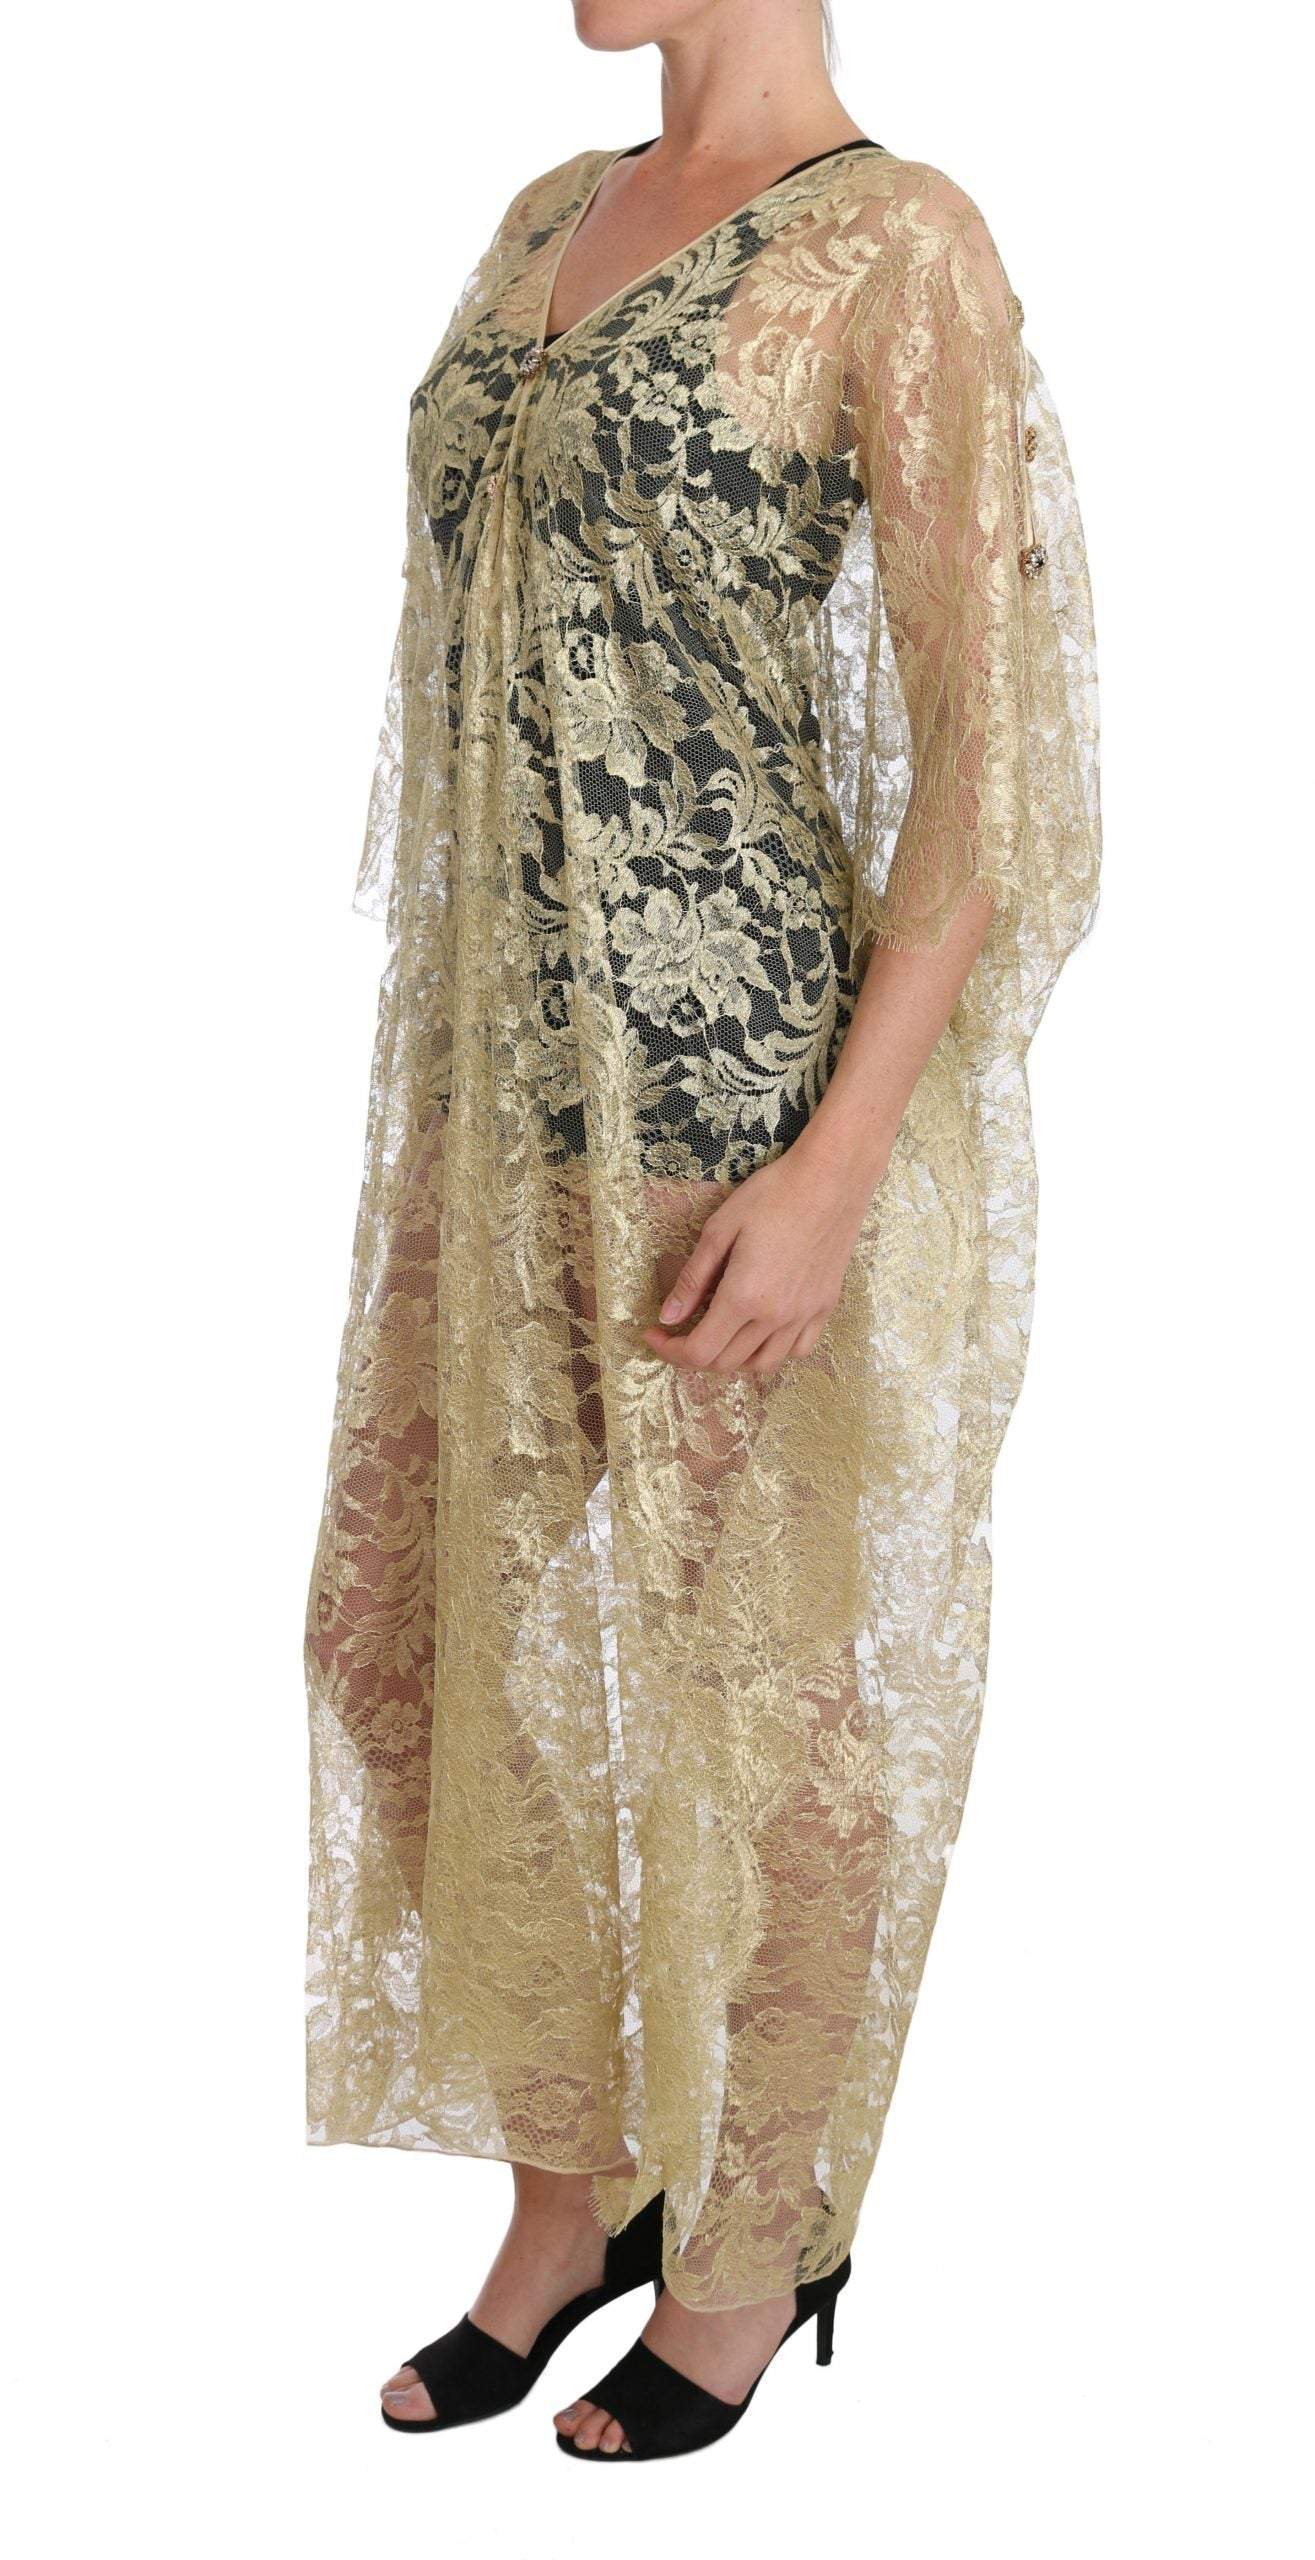 Dolce & Gabbana Gold Floral Lace Crystal Gown Cape Dress #women, Brand_Dolce & Gabbana, Catch, Clothing_Dress, Dolce & Gabbana, Dresses - Women - Clothing, feed-agegroup-adult, feed-color-gold, feed-gender-female, feed-size-IT36 | XS, feed-size-IT38 | S, feed-size-IT40 | M, Gender_Women, Gold, IT36 | XS, IT38 | S, IT40 | M, Kogan, Women - New Arrivals at SEYMAYKA